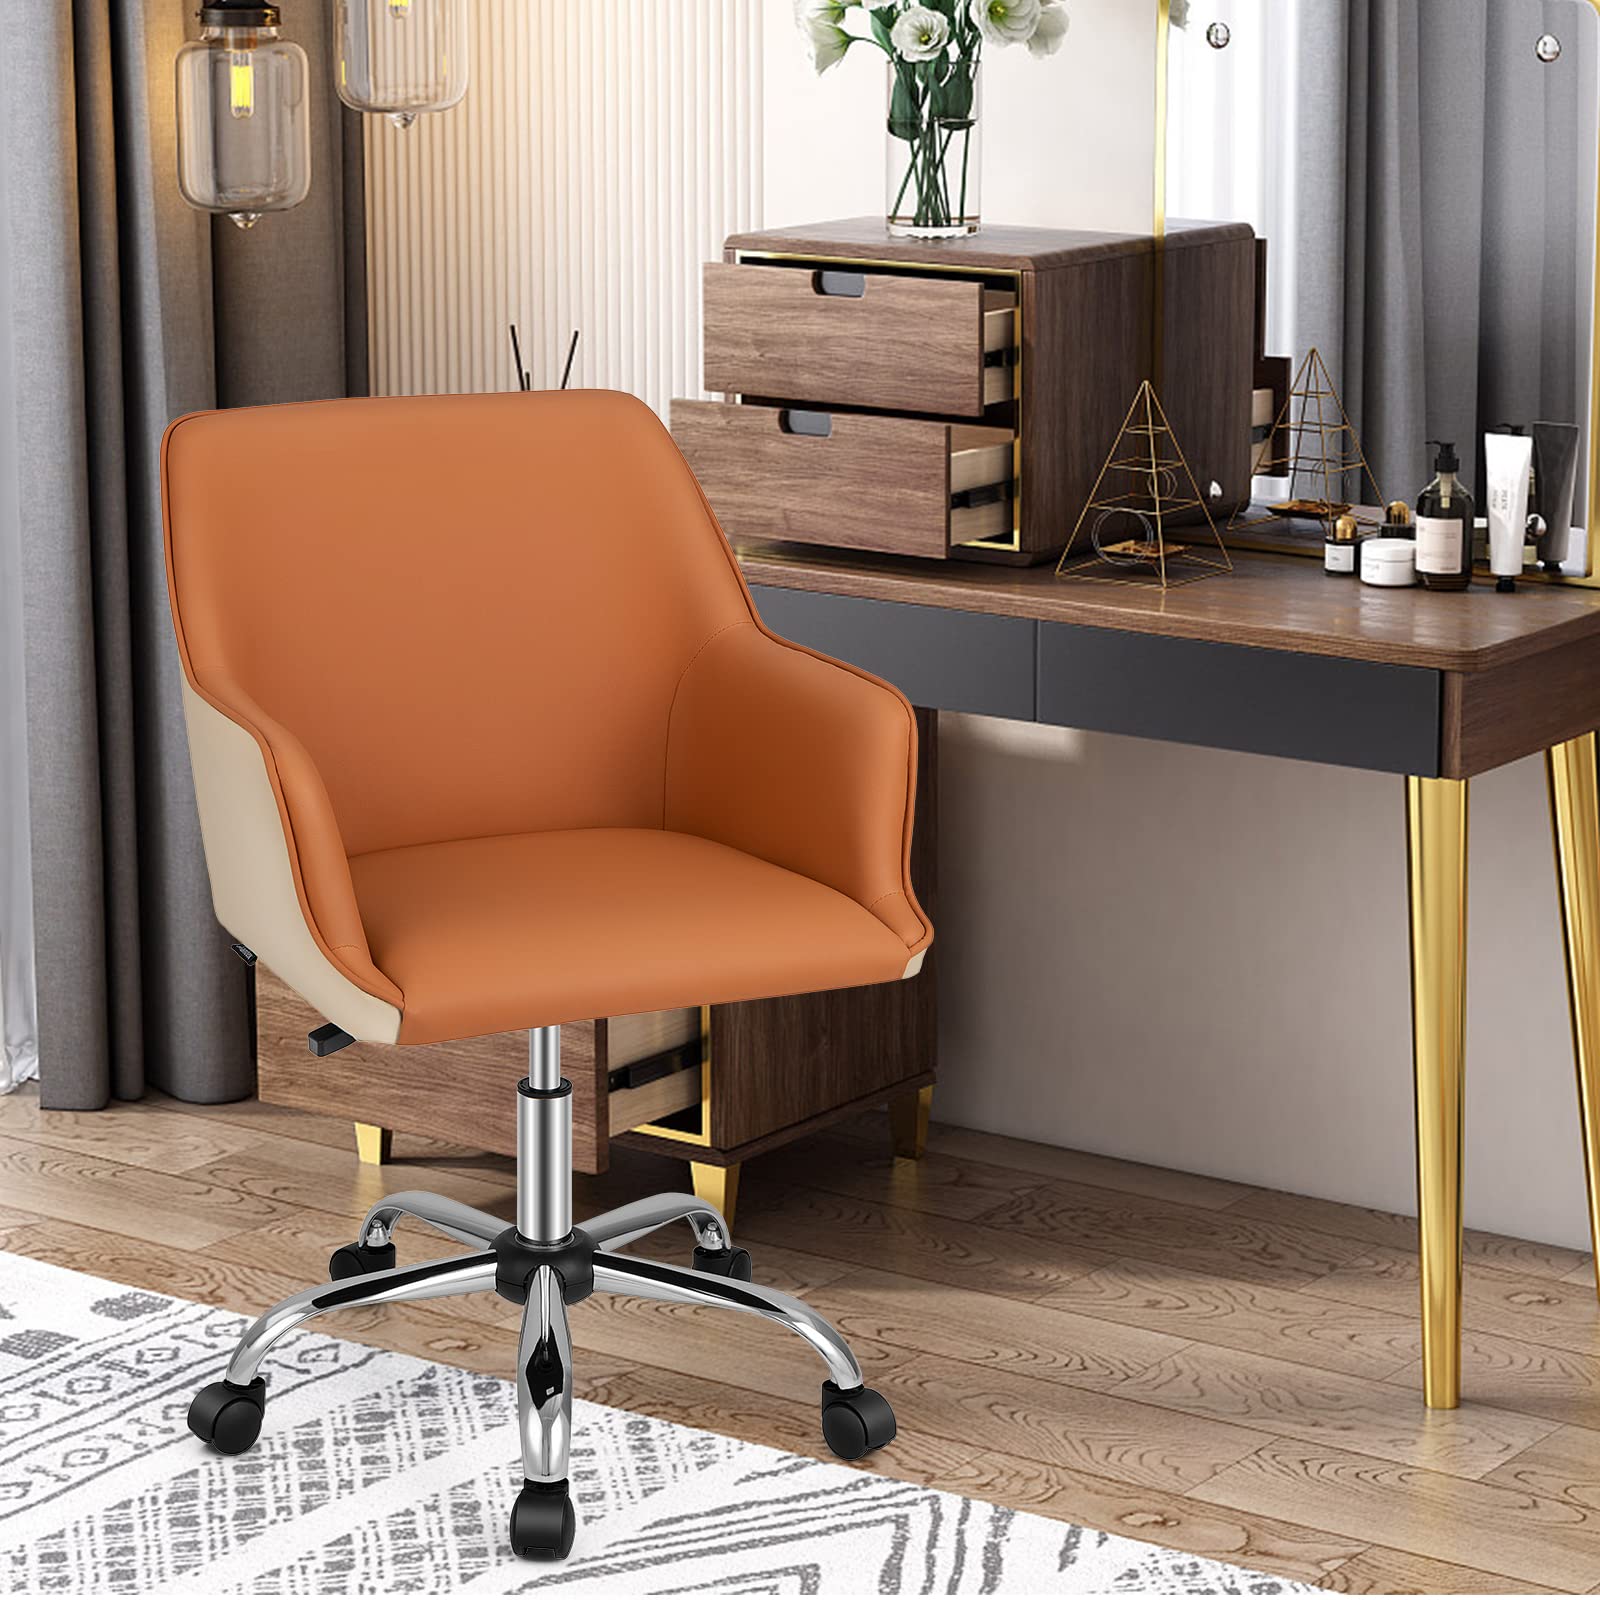 Giantex Home Office Desk Chair, Upholstered PU Leather Task Chair, Orange & Beige